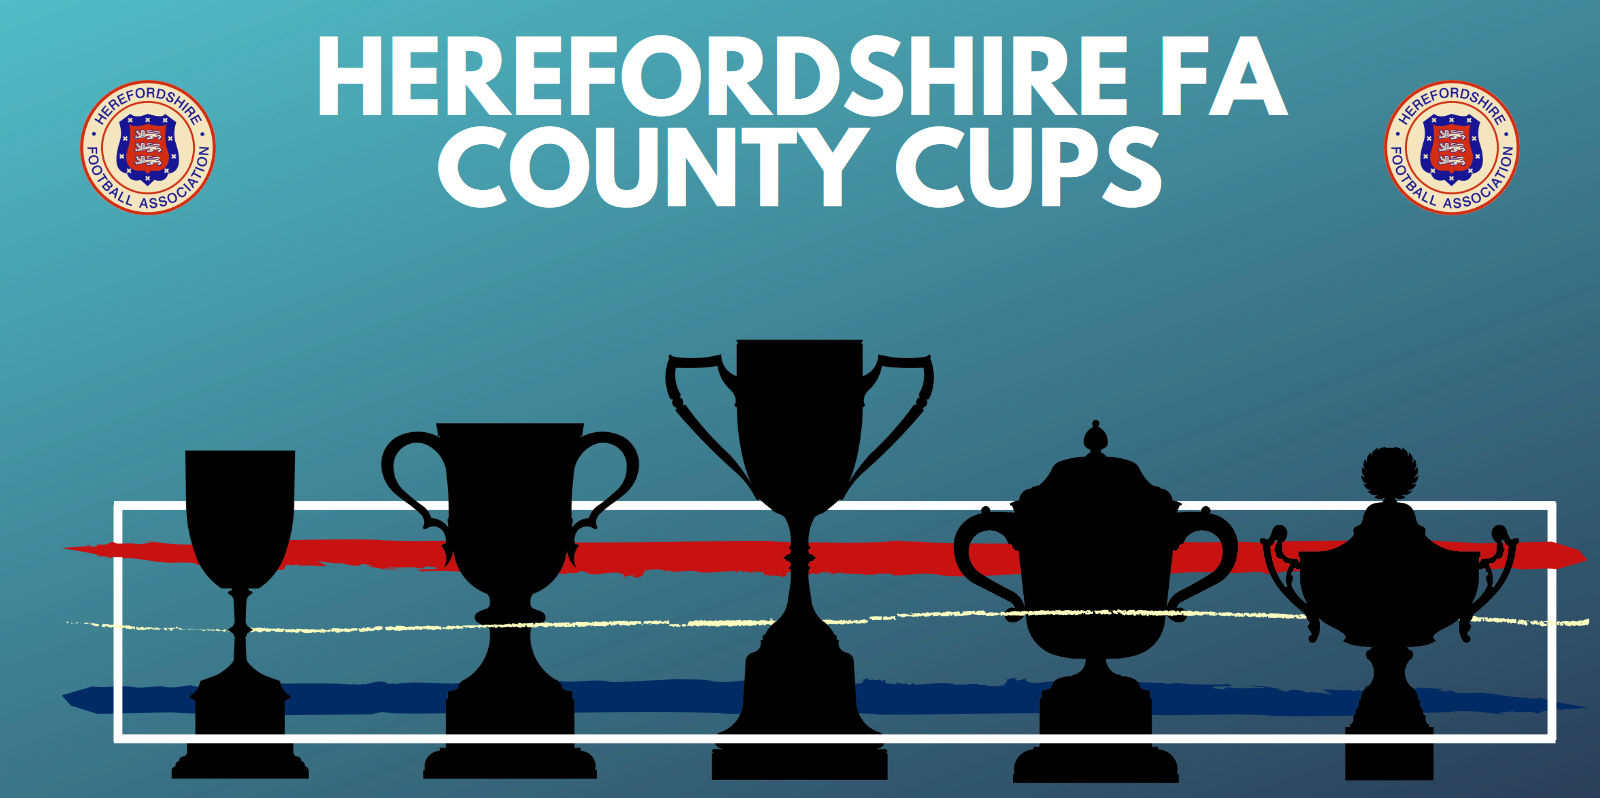 All The Latest County Cup Draws Herefordshire FA